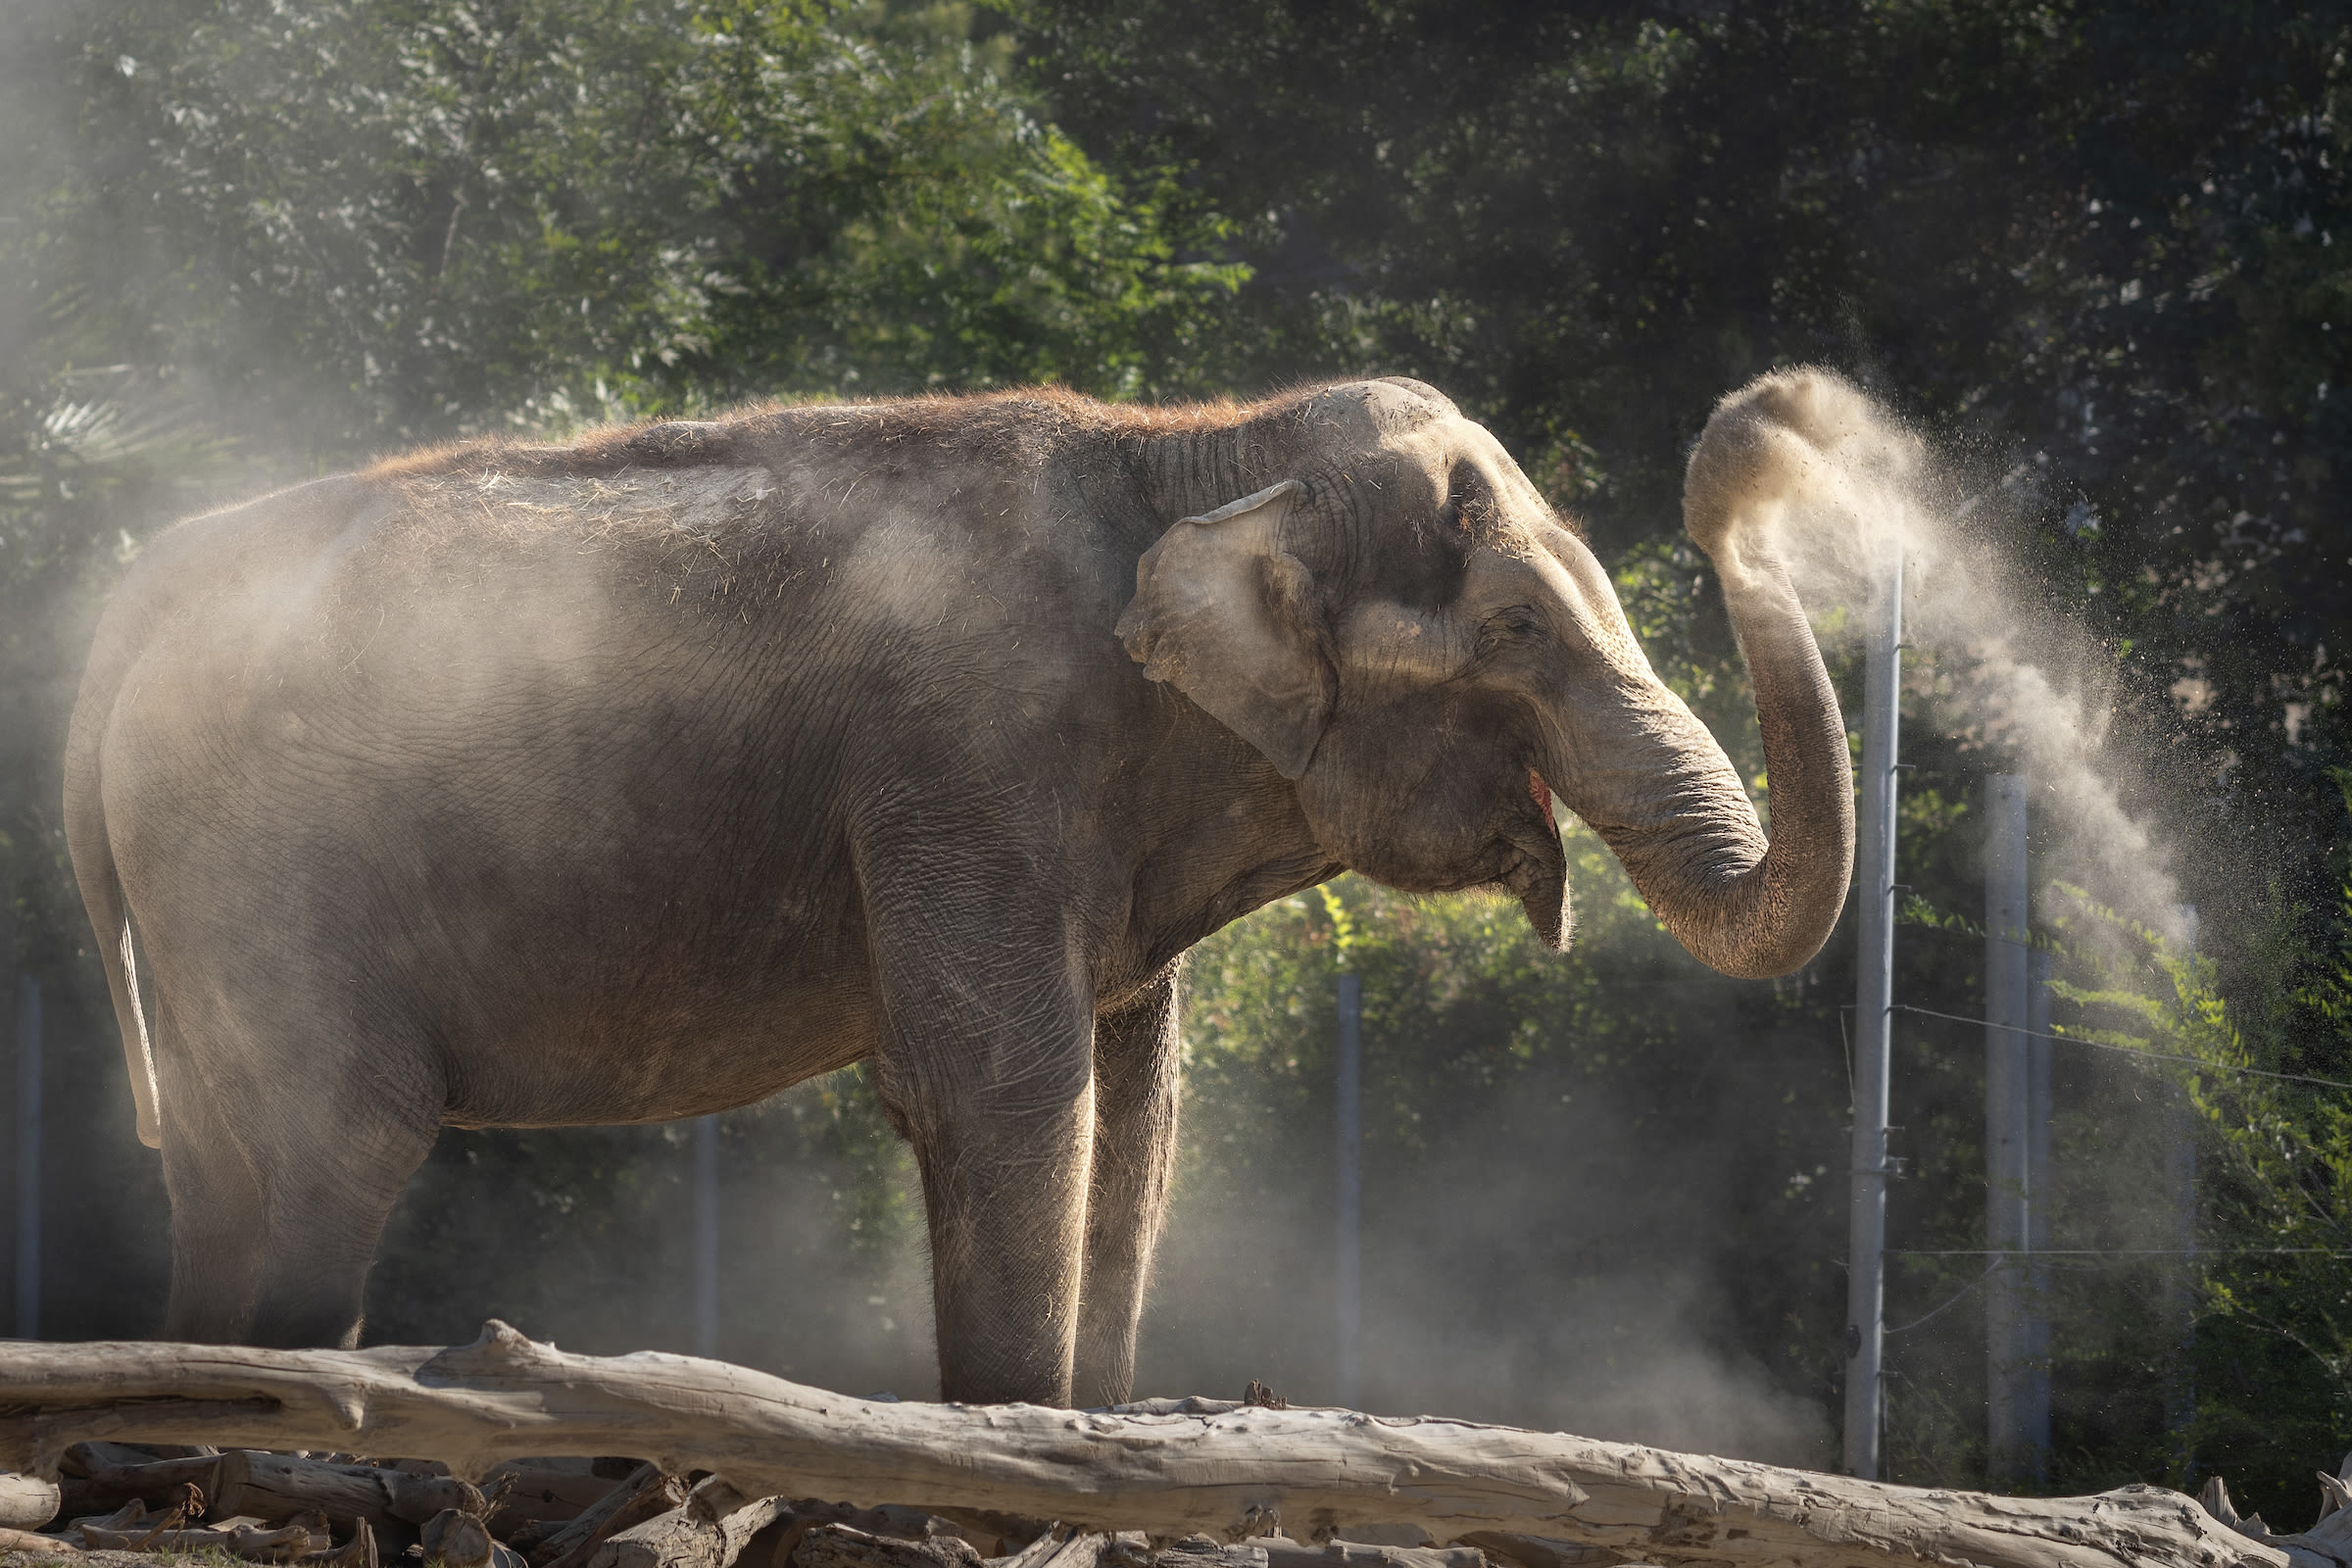 After two L.A. Zoo elephants die in the span of one year, the City Council wants answers